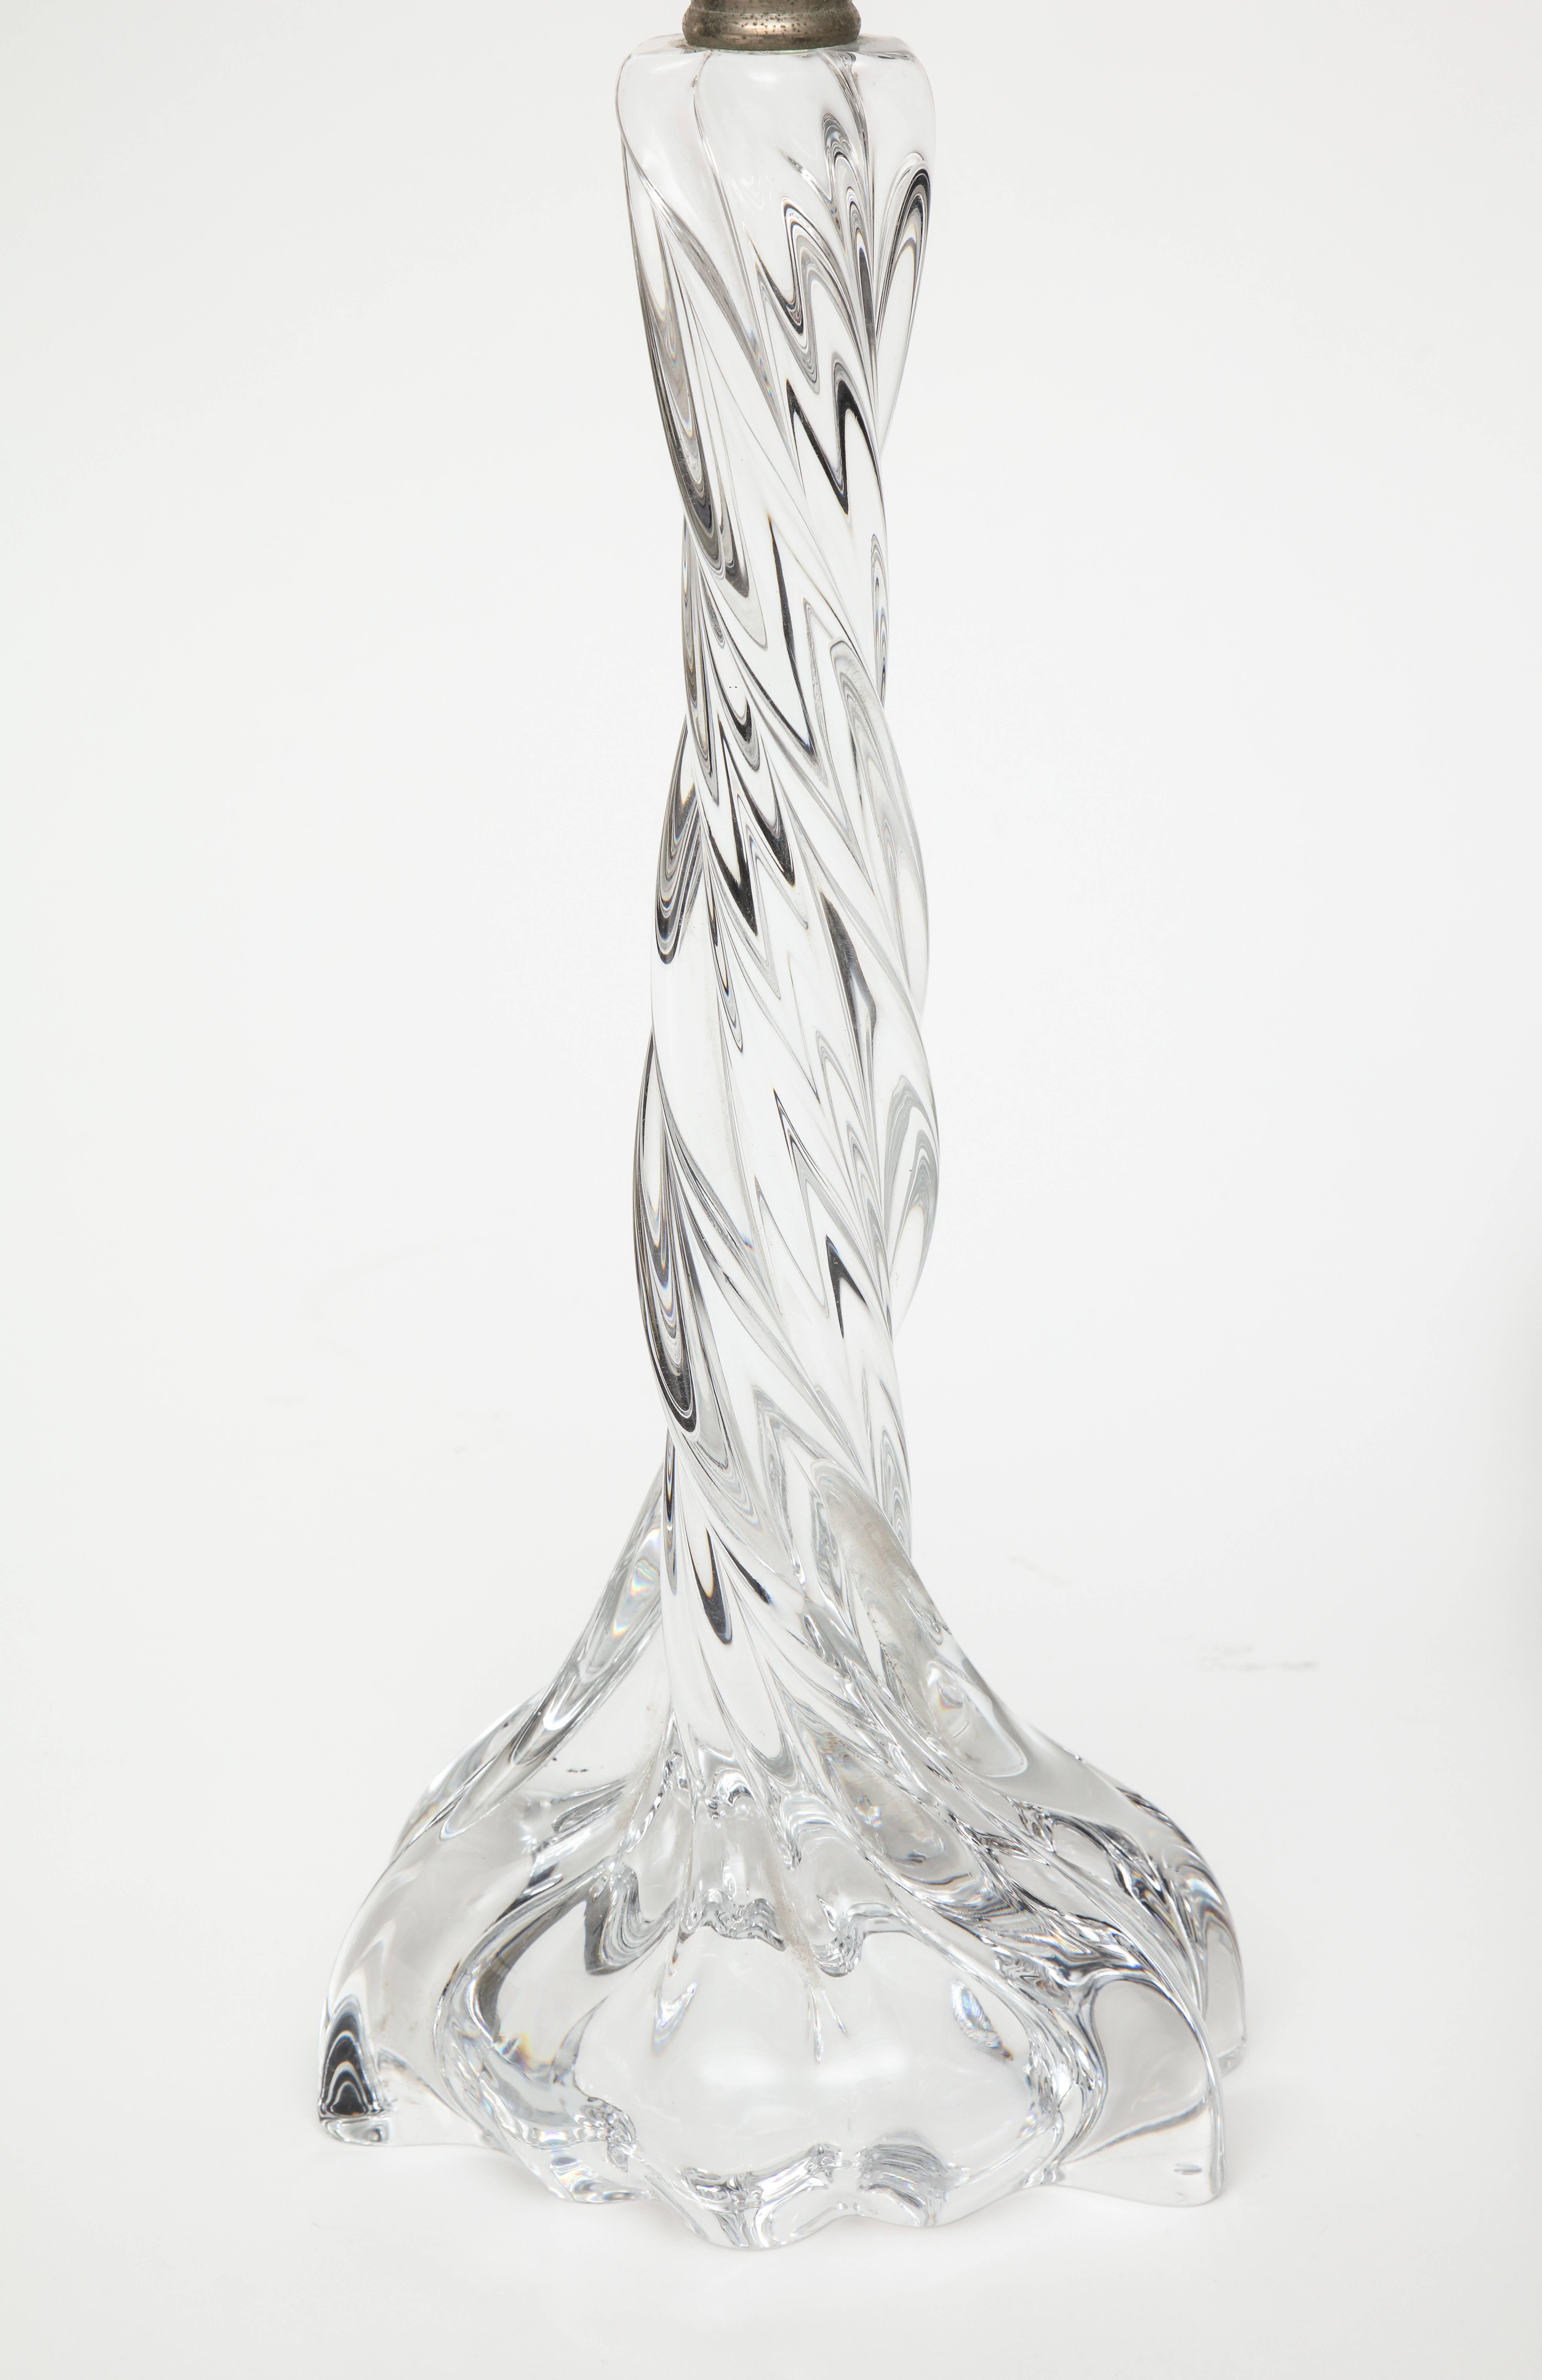 Baccarat crystal desk lamp France with beautiful twisted pattern. Very heavy. 
Weighs over 9 pounds without the shade.
Elegant and Modern.

15 inches to top of the crystal
7 inches diameter base
27 inches to top of lampshade

History of